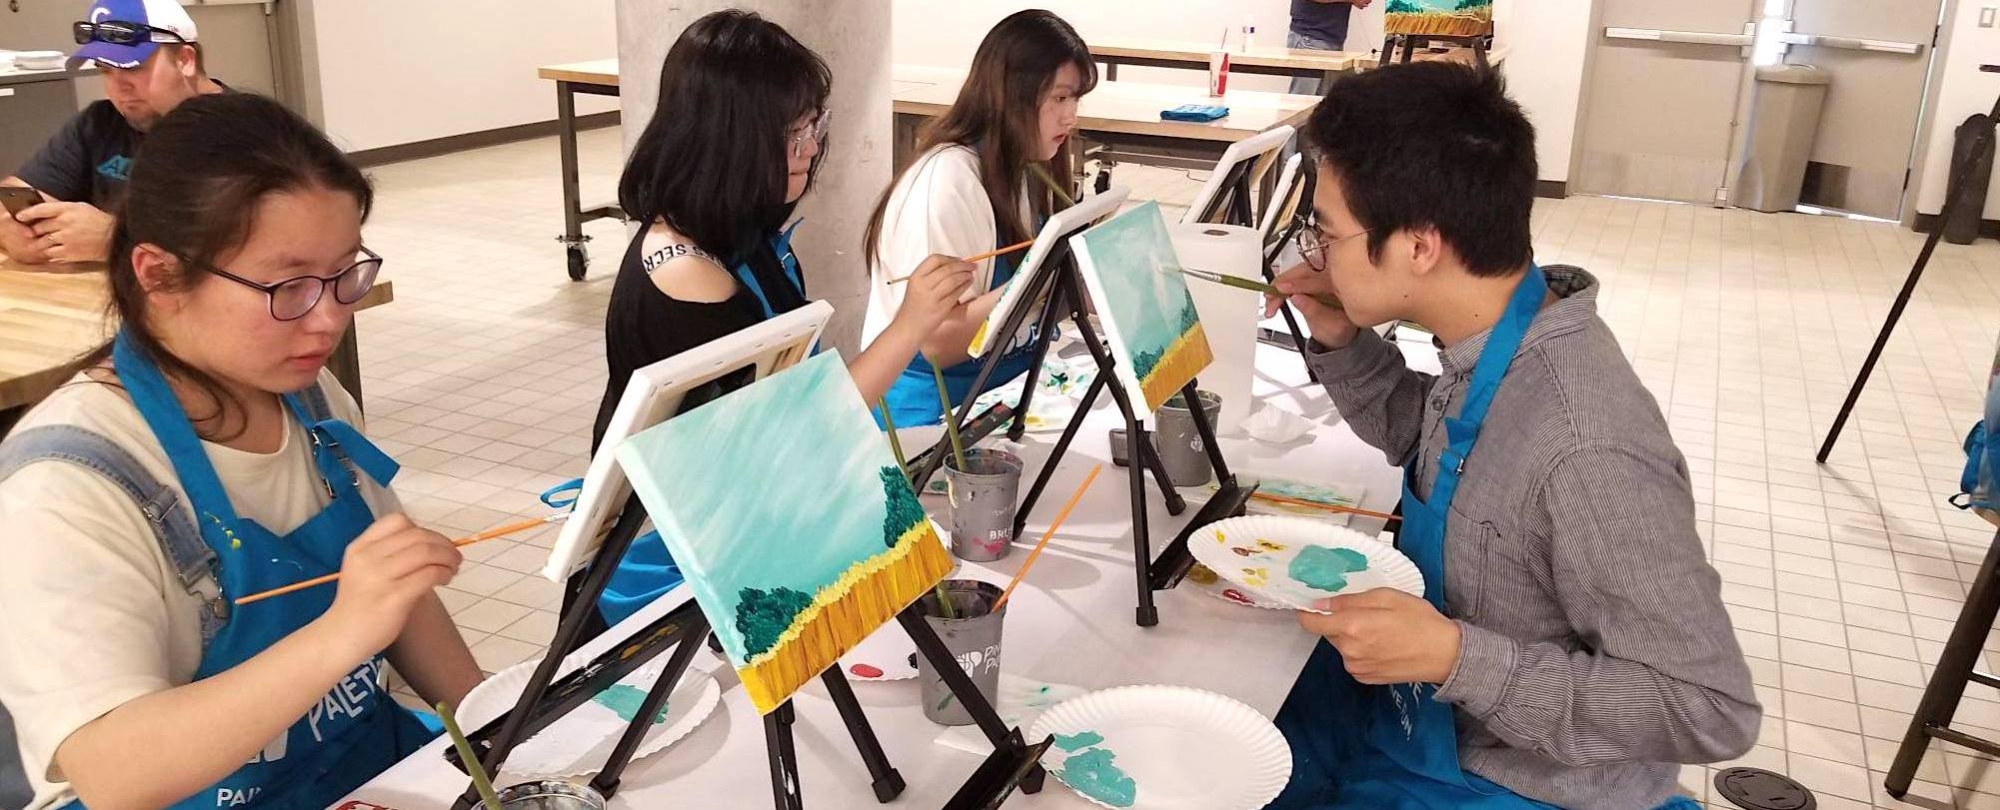 CESL students painting